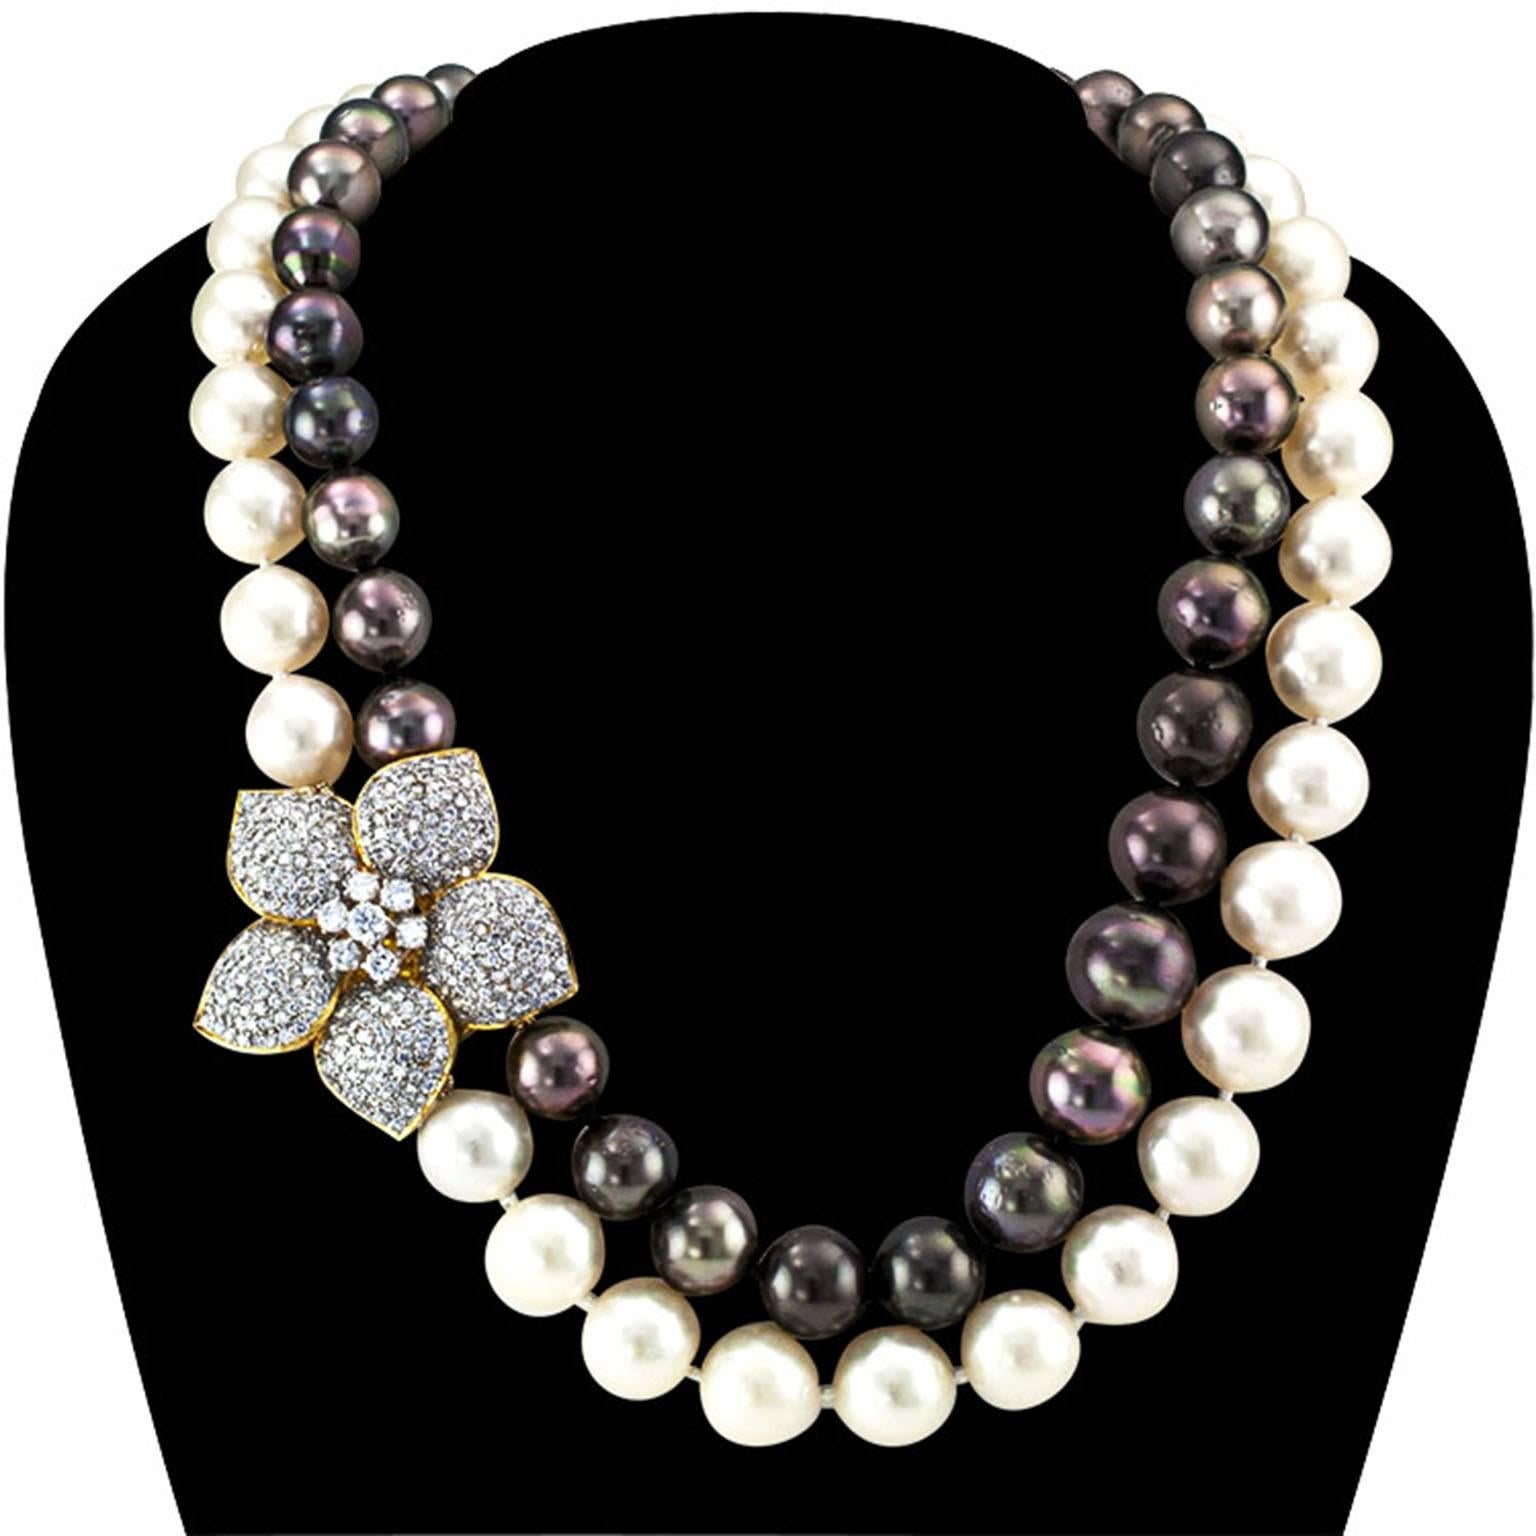 Contemporary Tahitian and South Sea Pearl Necklace With Diamond Flower Clasp